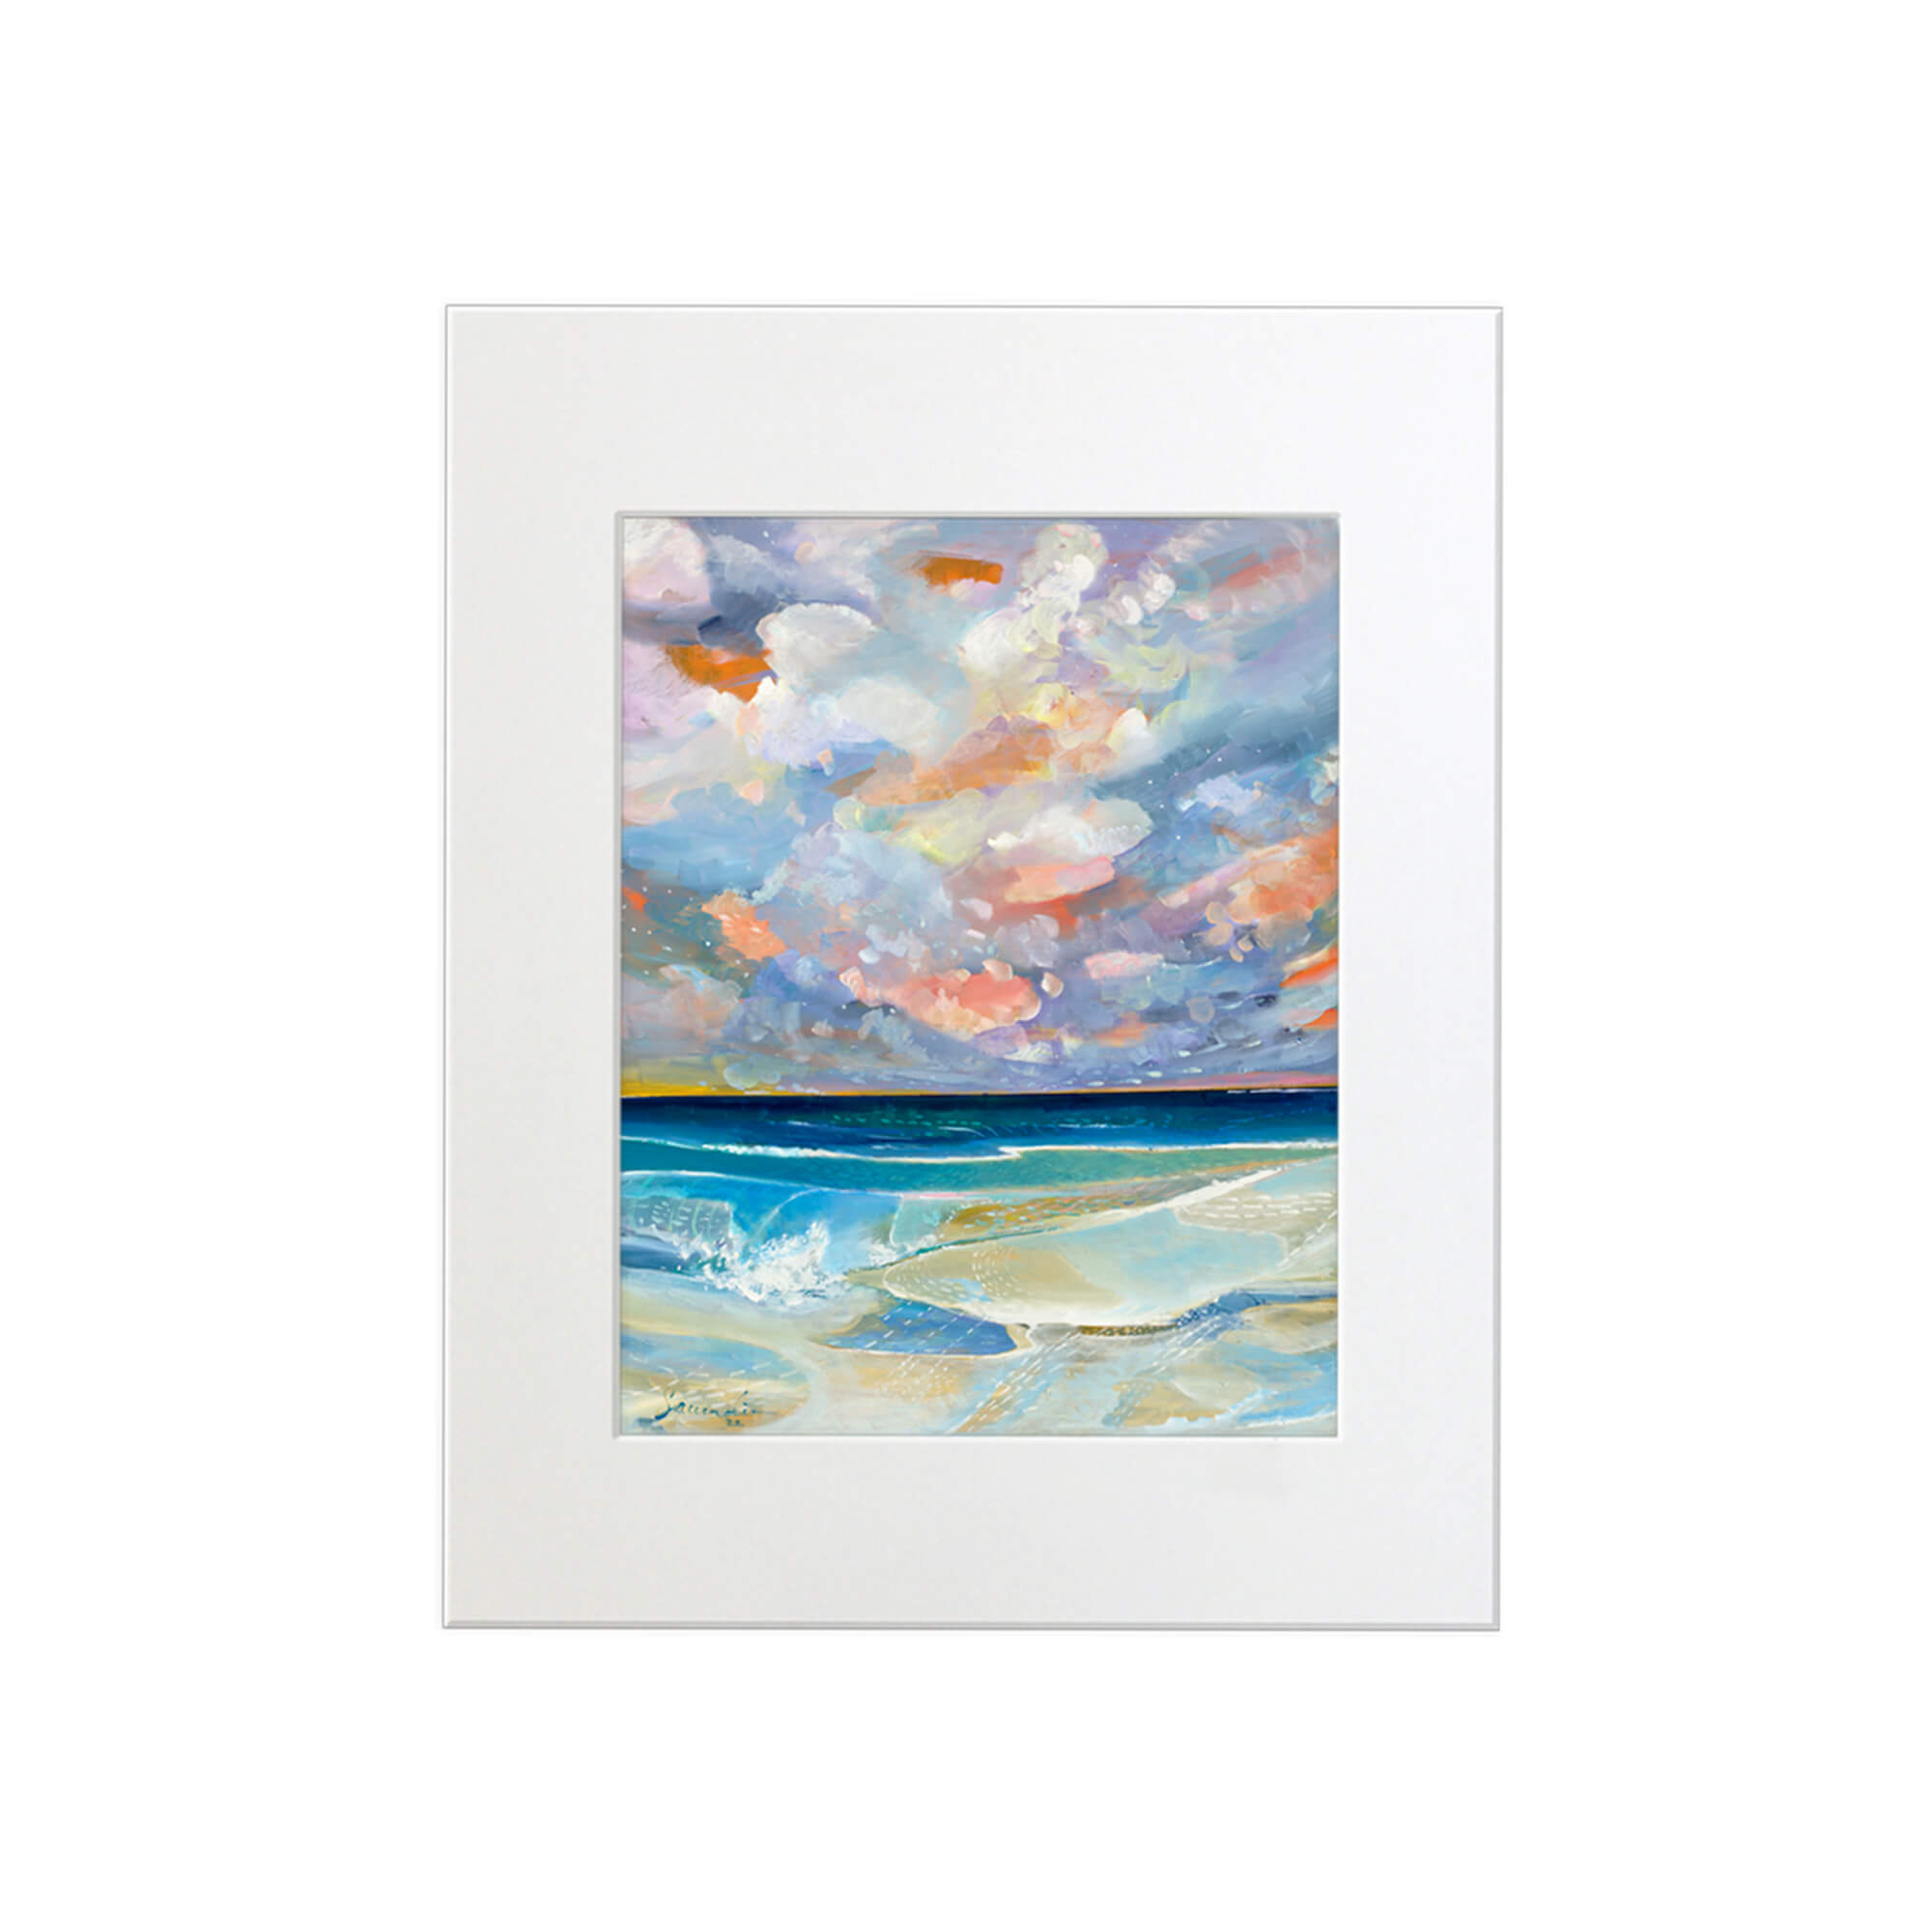 A matted art print featuring abstract teal and blue tinted waves crashing towards the shore by popular Hawaii artist Saumolia Puapuaga